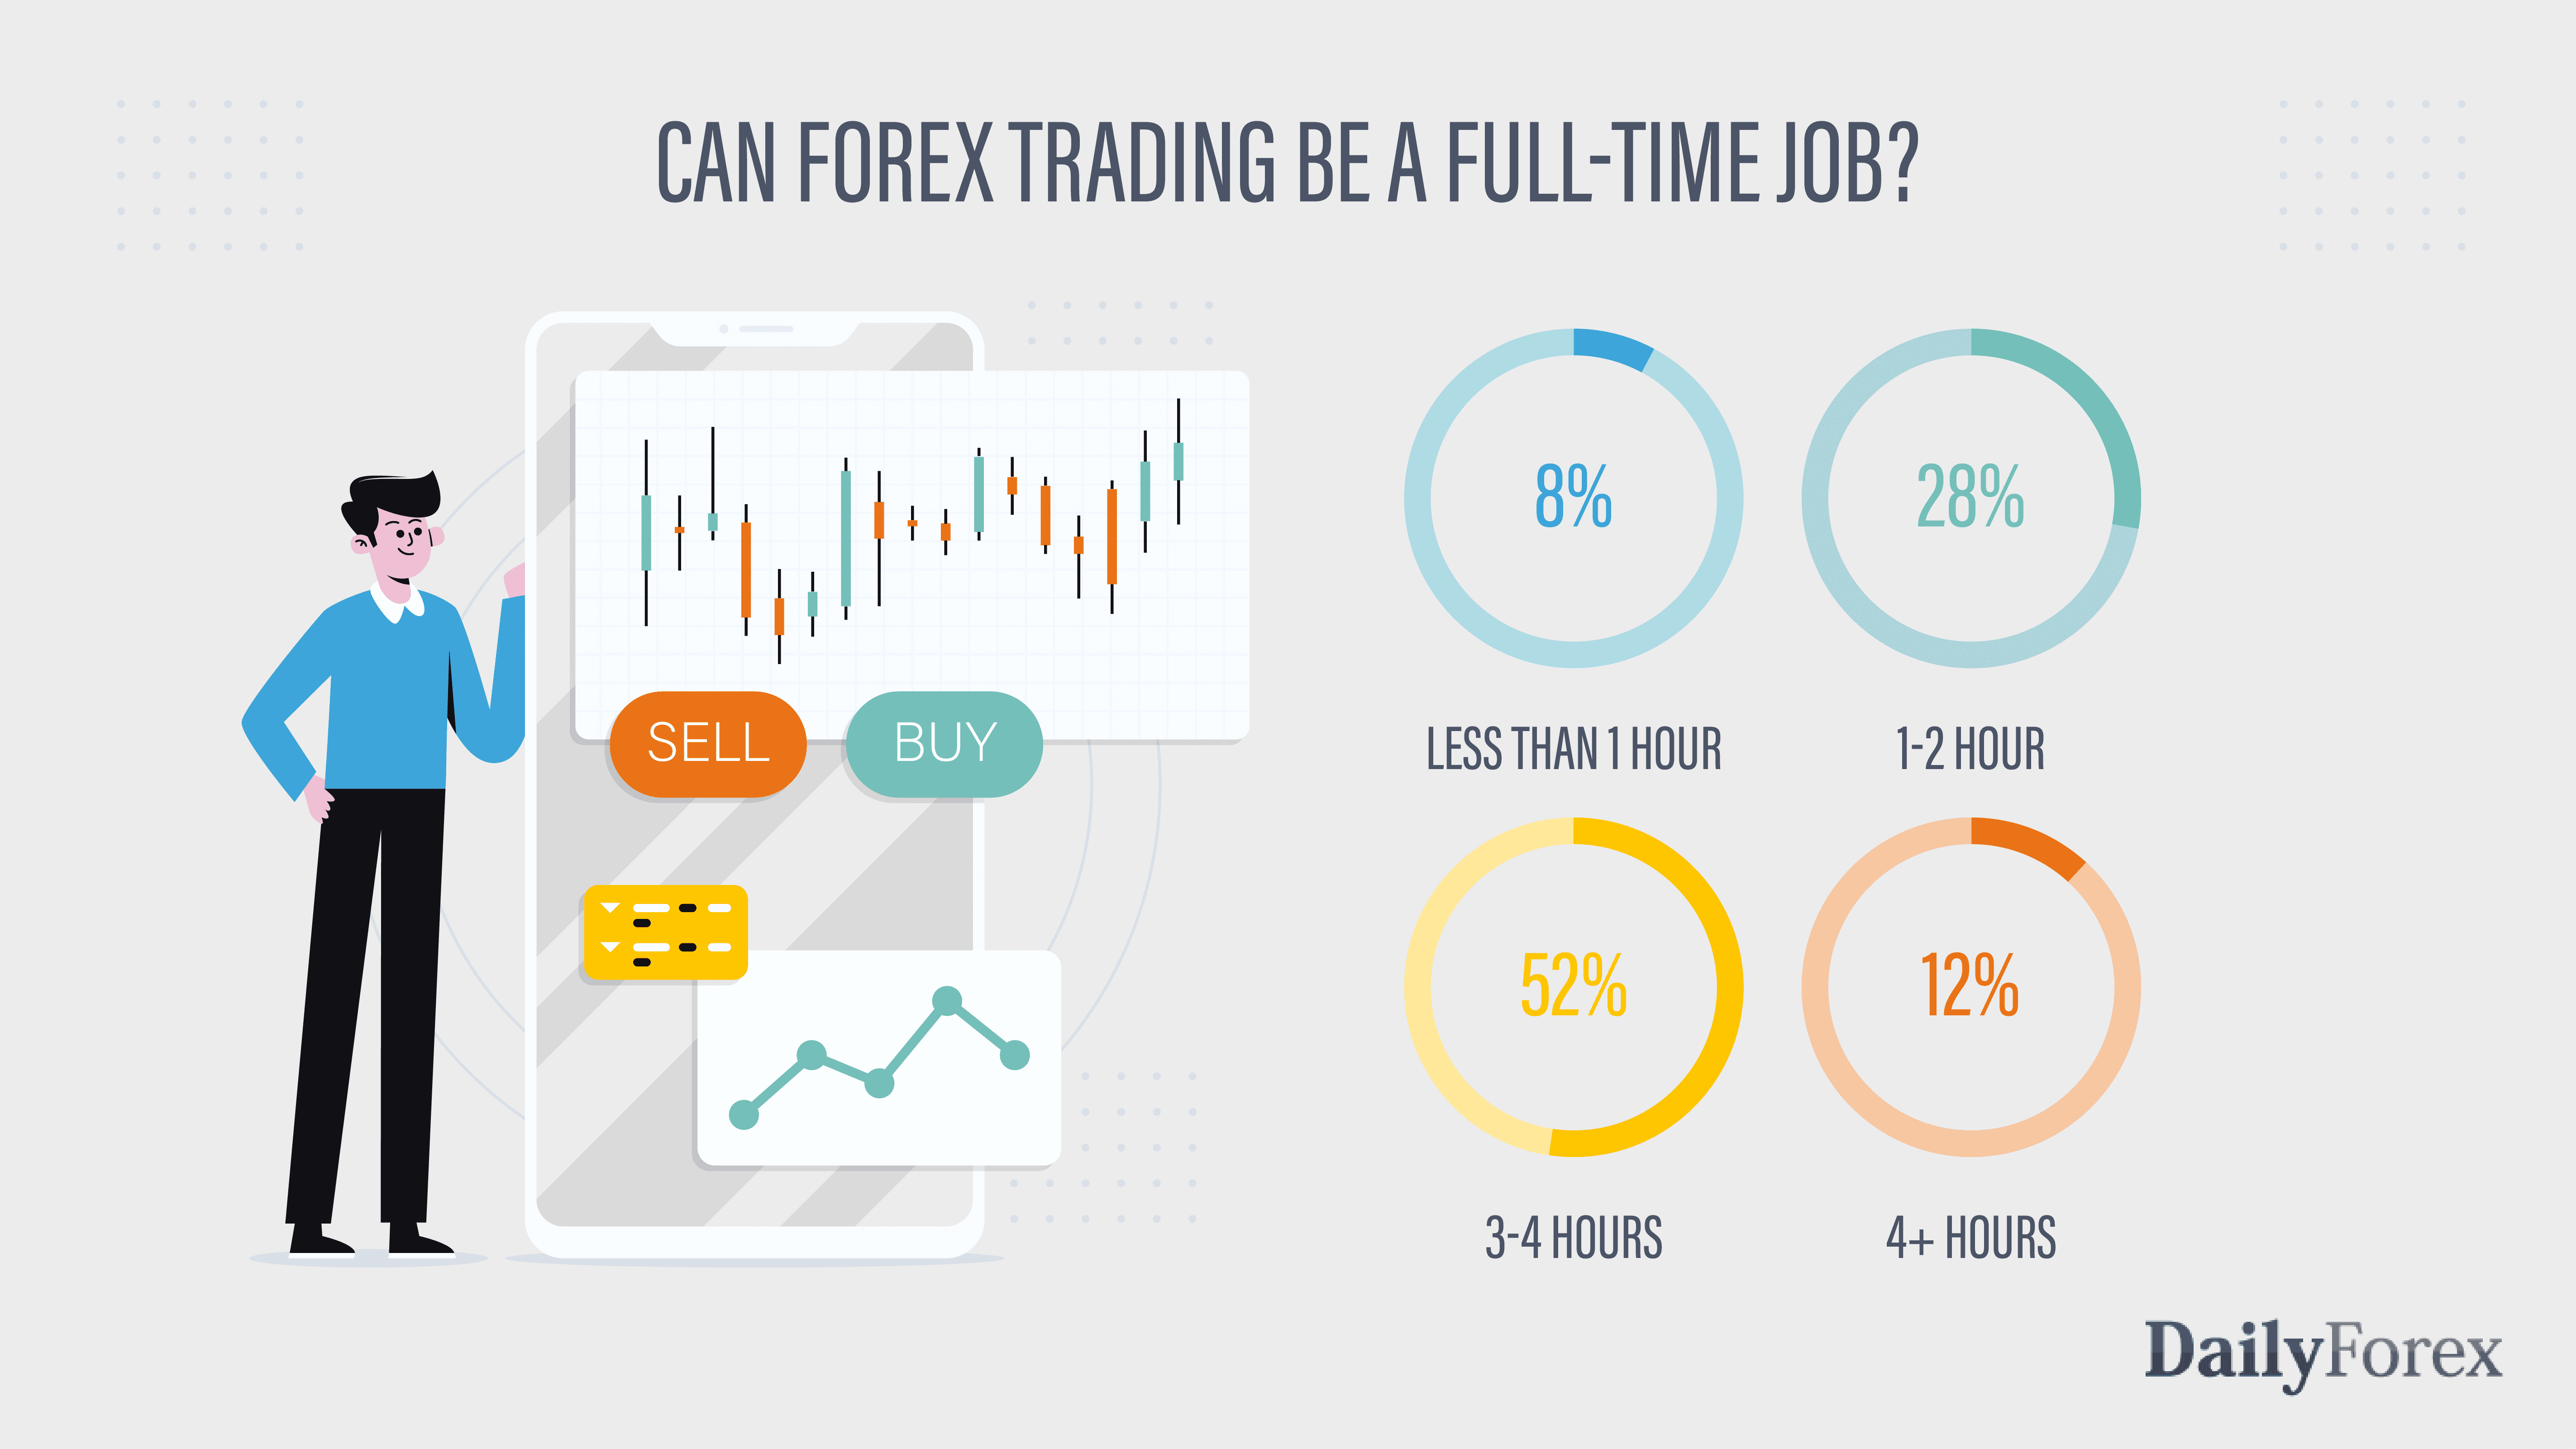 retail forex traders statistics on bullying